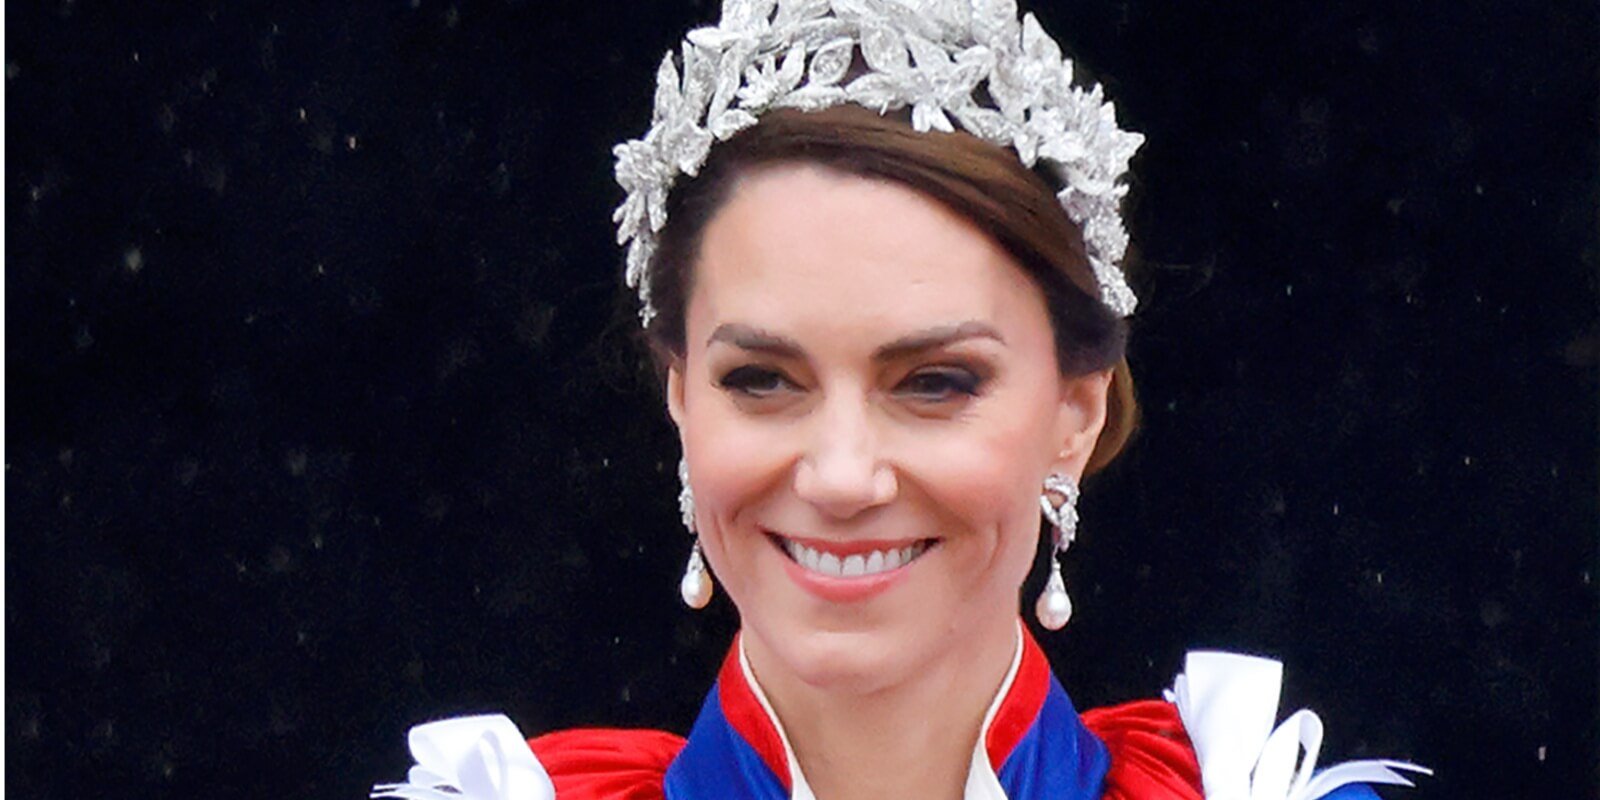 Kate Middleton wears Princess Diana's earrings at King Charles' coronation on May 6, 2023.